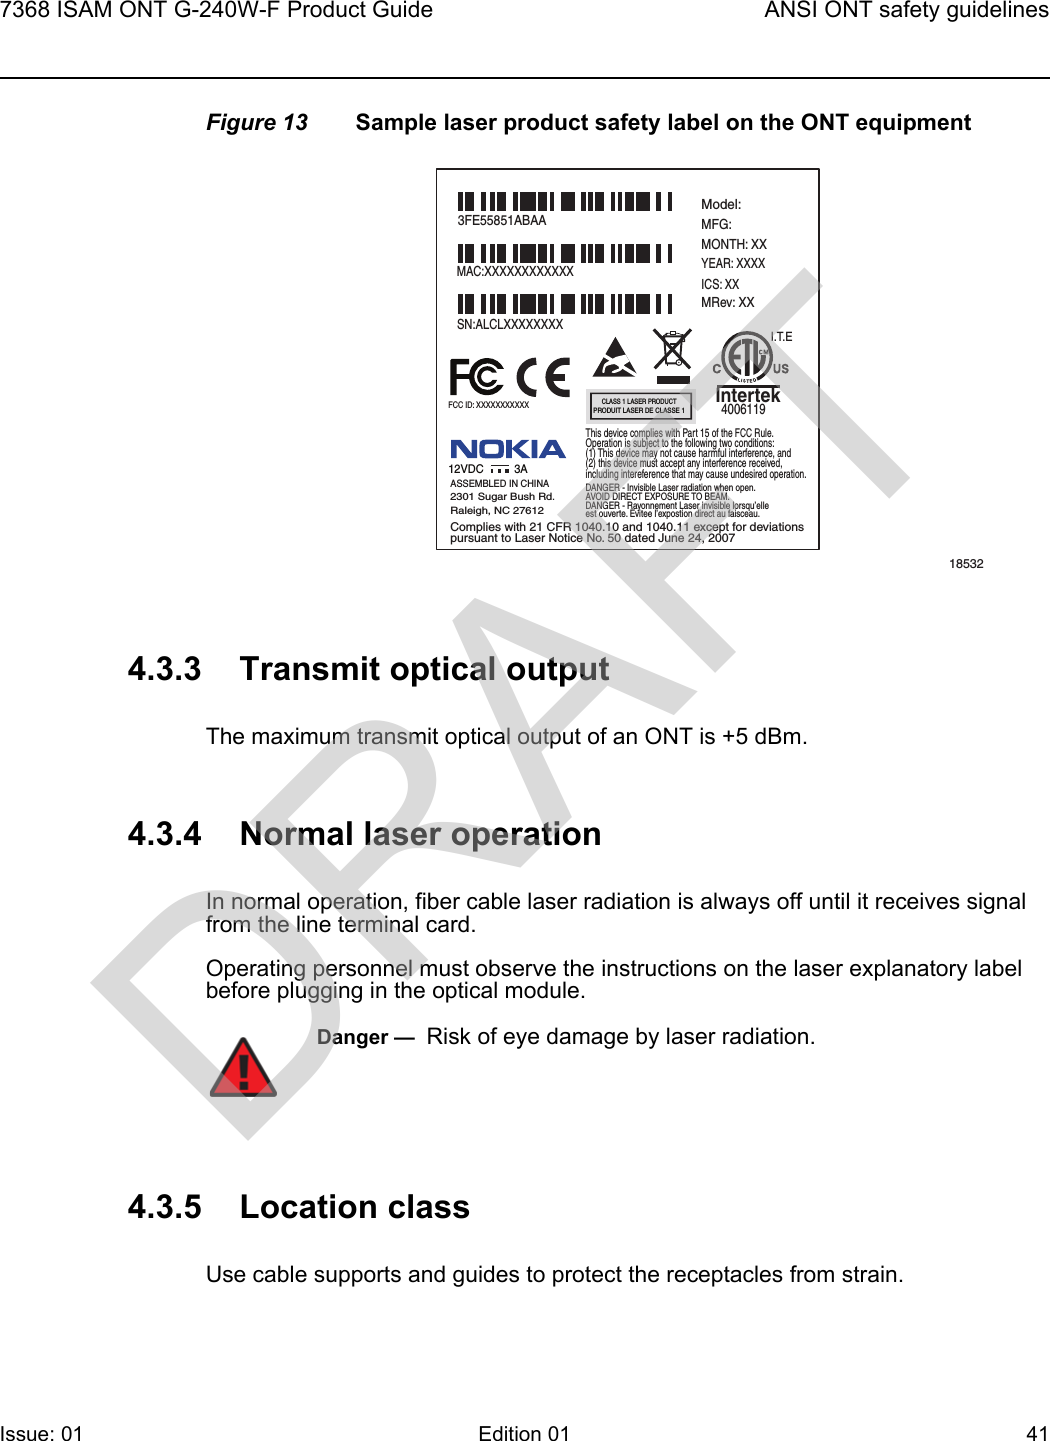 7368 ISAM ONT G-240W-F Product Guide ANSI ONT safety guidelinesIssue: 01 Edition 01 41 Figure 13 Sample laser product safety label on the ONT equipment4.3.3 Transmit optical outputThe maximum transmit optical output of an ONT is +5 dBm.4.3.4 Normal laser operationIn normal operation, fiber cable laser radiation is always off until it receives signal from the line terminal card.Operating personnel must observe the instructions on the laser explanatory label before plugging in the optical module.4.3.5 Location classUse cable supports and guides to protect the receptacles from strain.185323FE55851ABAAModel:MFG:MONTH: XXYEAR: XXXXICS: XXMRev: XX MAC:XXXXXXXXXXXXSN:ALCLXXXXXXXXFCC ID: XXXXXXXXXXXThis device complies with Part 15 of the FCC Rule.Operation is subject to the following two conditions:(1) This device may not cause harmful interference, and(2) this device must accept any interference received,including intereference that may cause undesired operation. ASSEMBLED IN CHINA2301 Sugar Bush Rd.Raleigh, NC 27612DANGER - Invisible Laser radiation when open.AVOID DIRECT EXPOSURE TO BEAM.DANGER - Rayonnement Laser invisible lorsqu’elleest ouverte. Evitee l’expostion direct au faisceau.Complies with 21 CFR 1040.10 and 1040.11 except for deviationspursuant to Laser Notice No. 50 dated June 24, 200712VDC 3AI.T.EIntertek4006119CLASS 1 LASER PRODUCTPRODUIT LASER DE CLASSE 1Danger —  Risk of eye damage by laser radiation.DRAFT